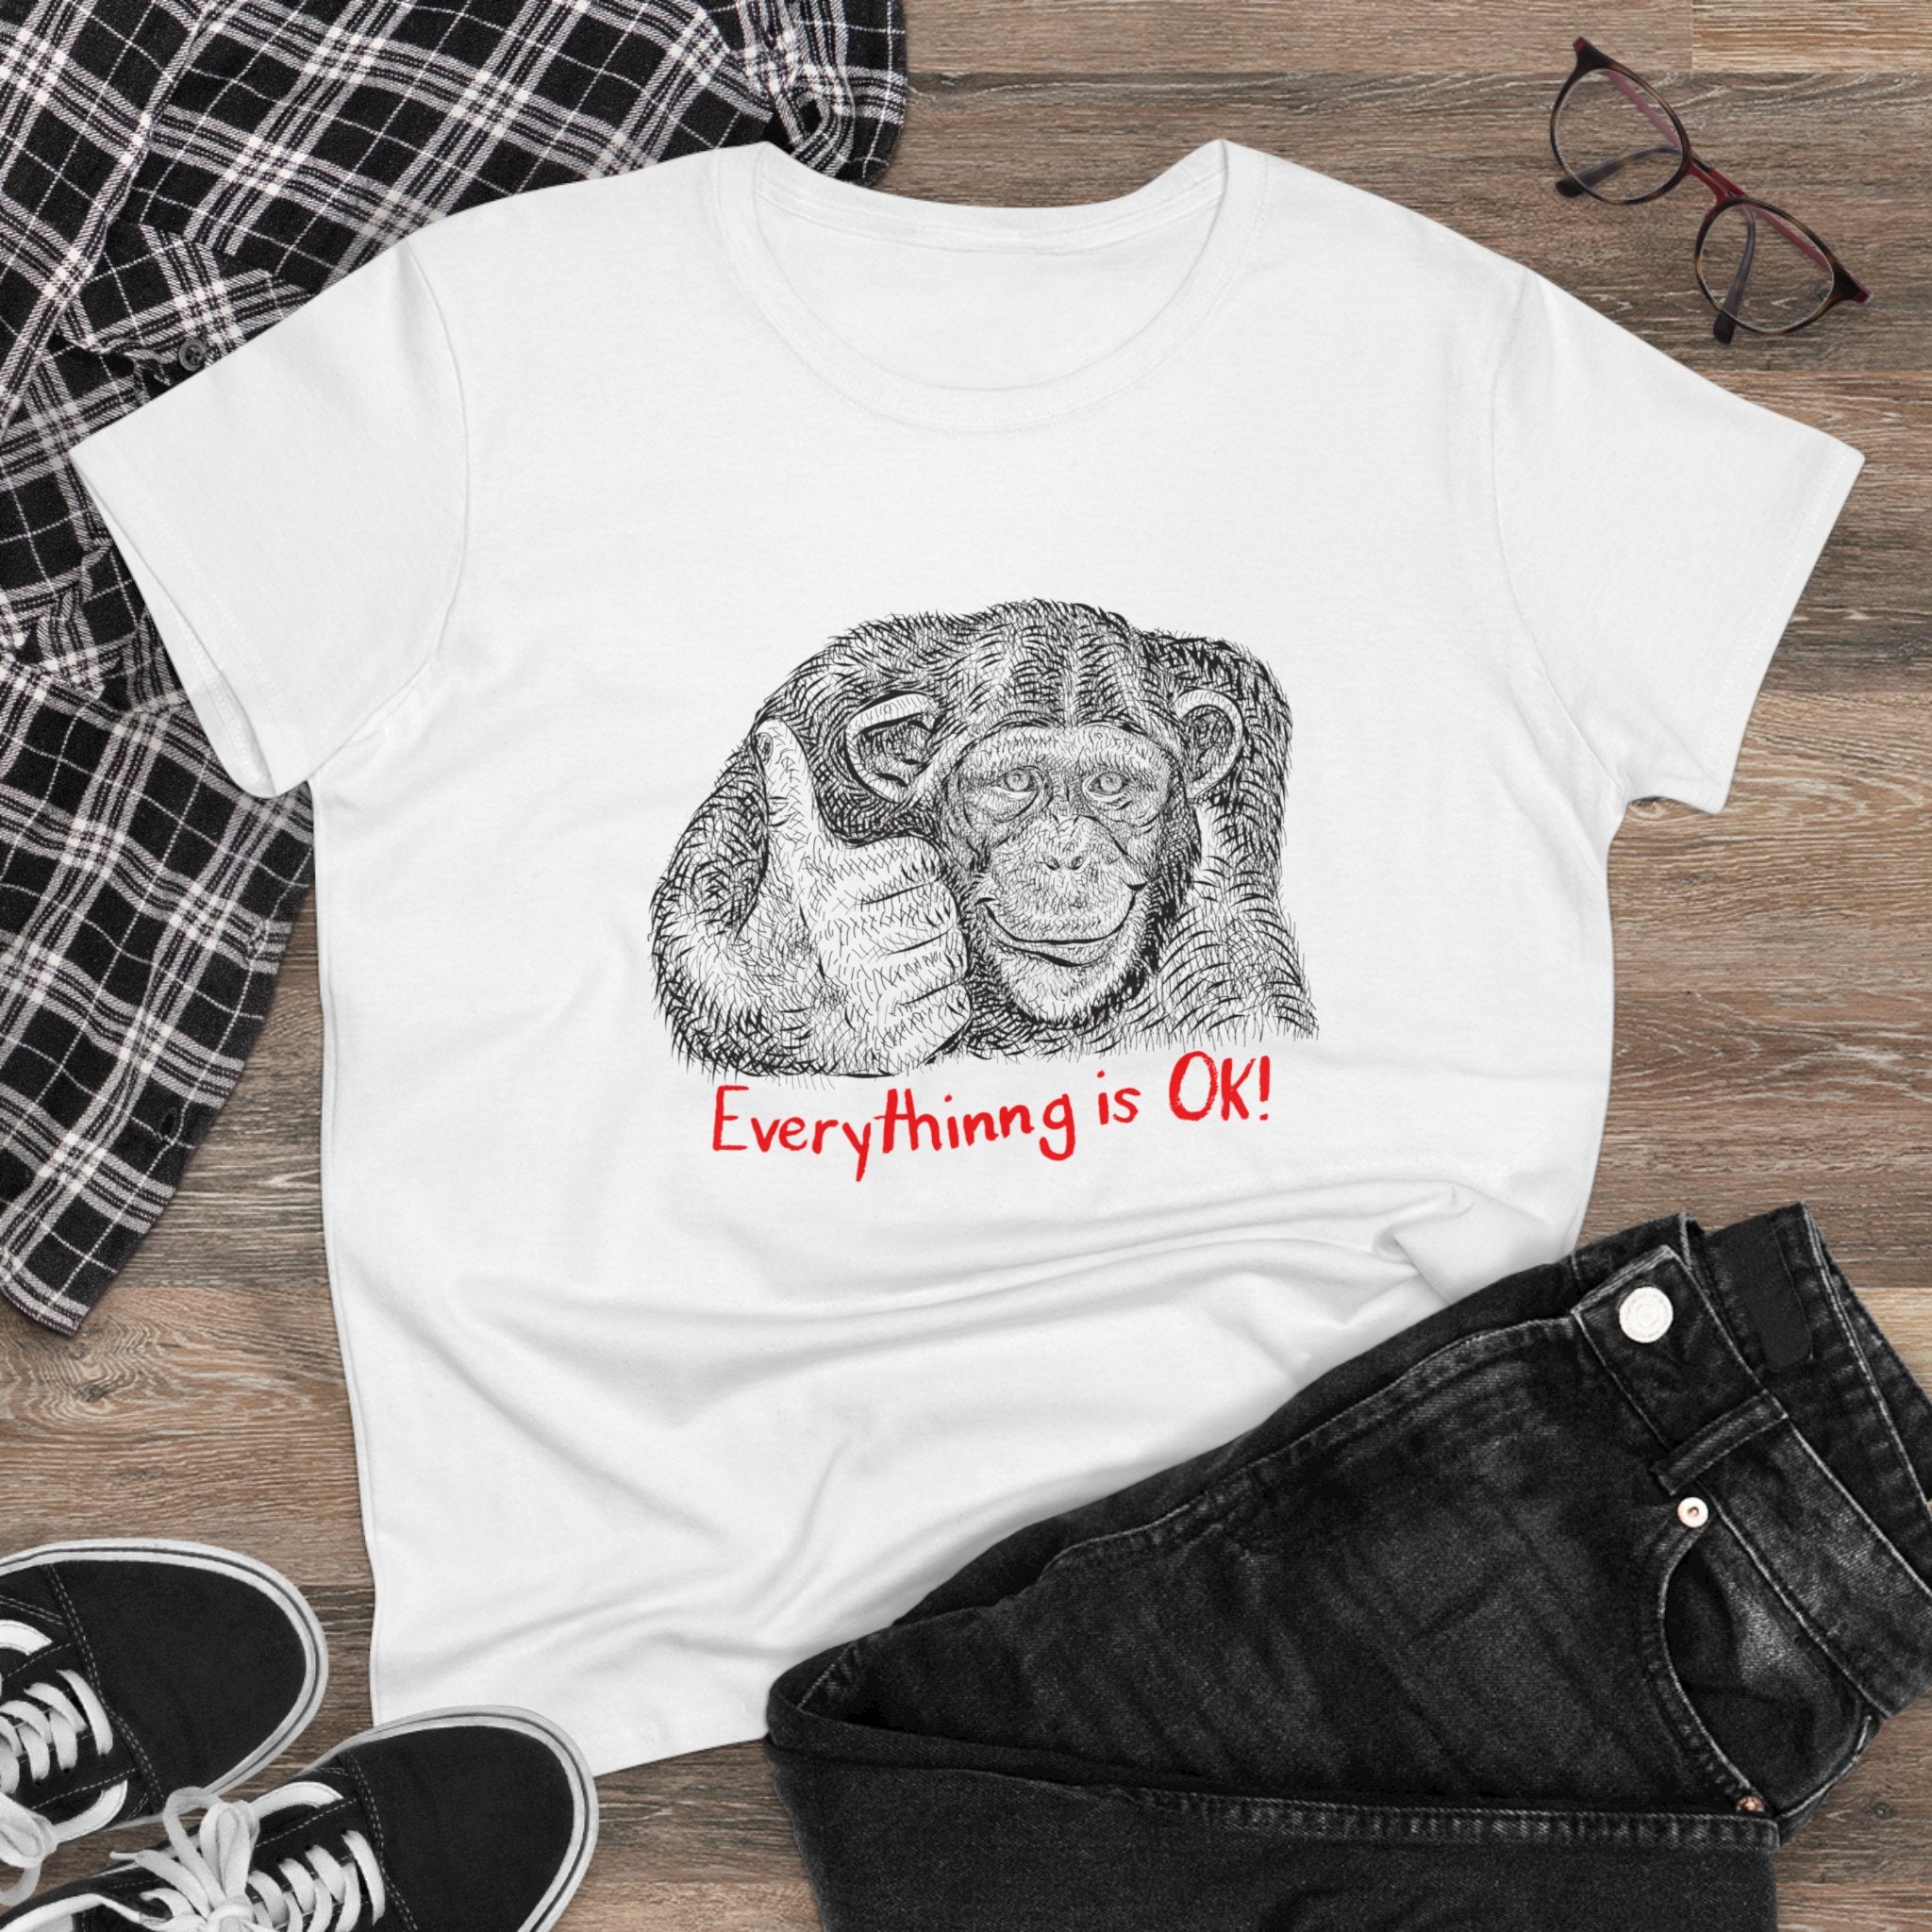 Everything is OK - Women'sTee